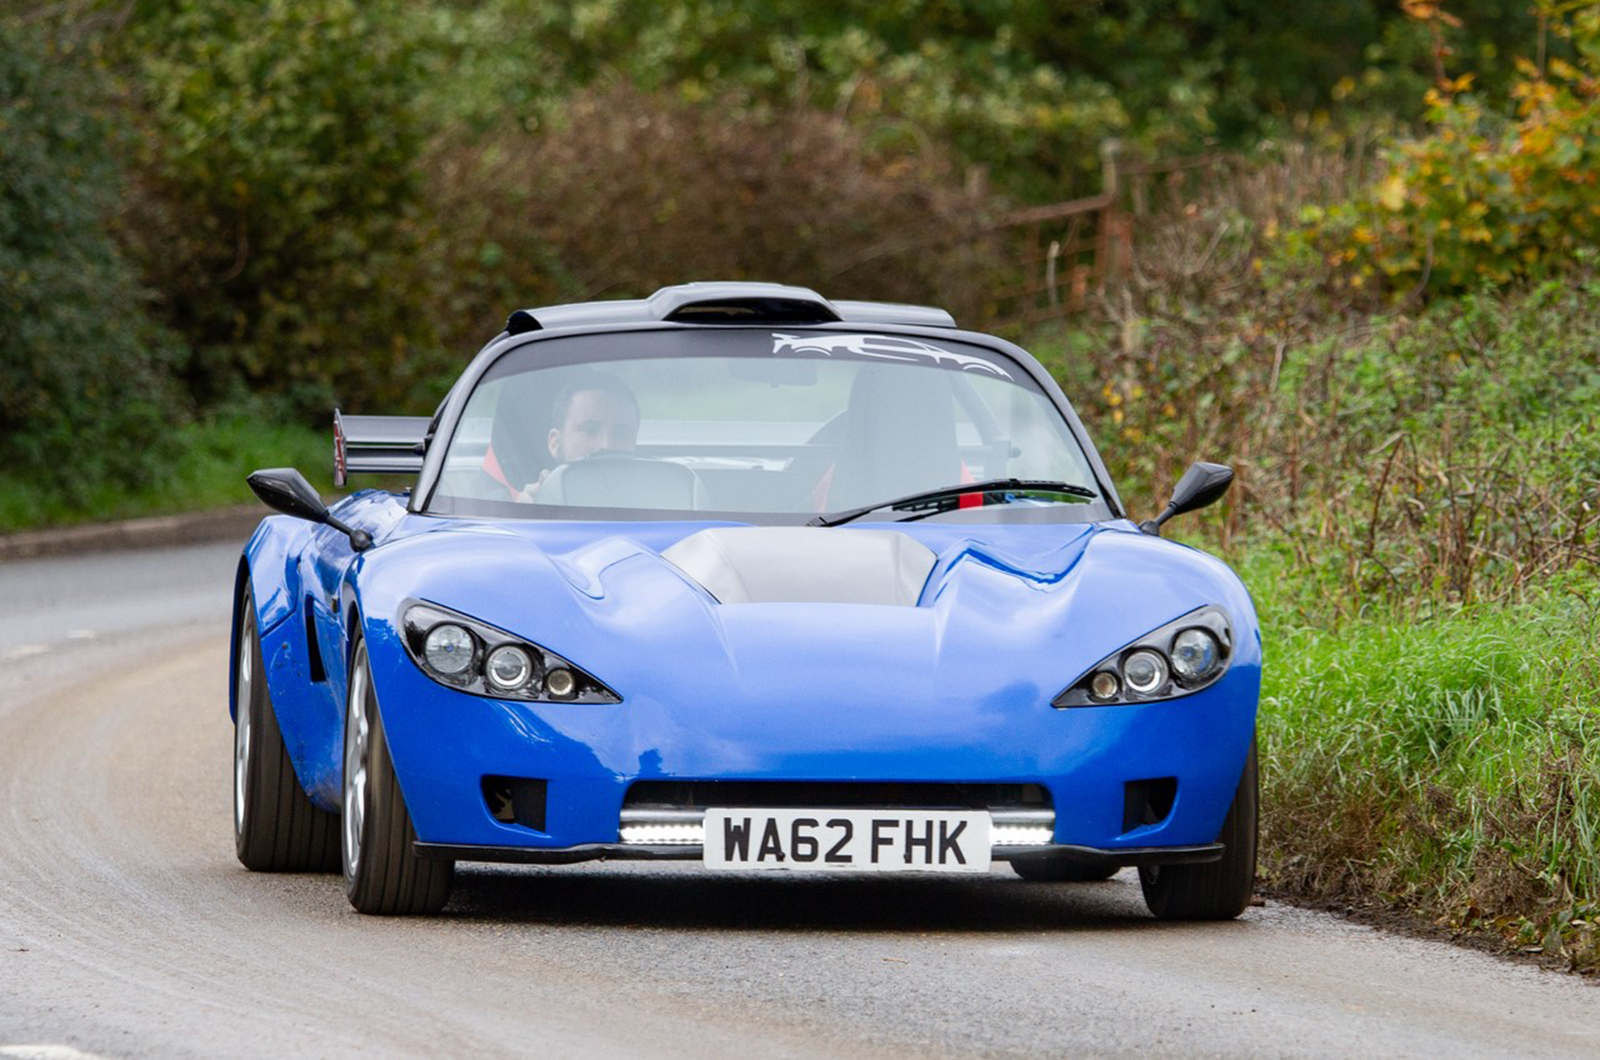 Kit-car firm Marlin offered for sale